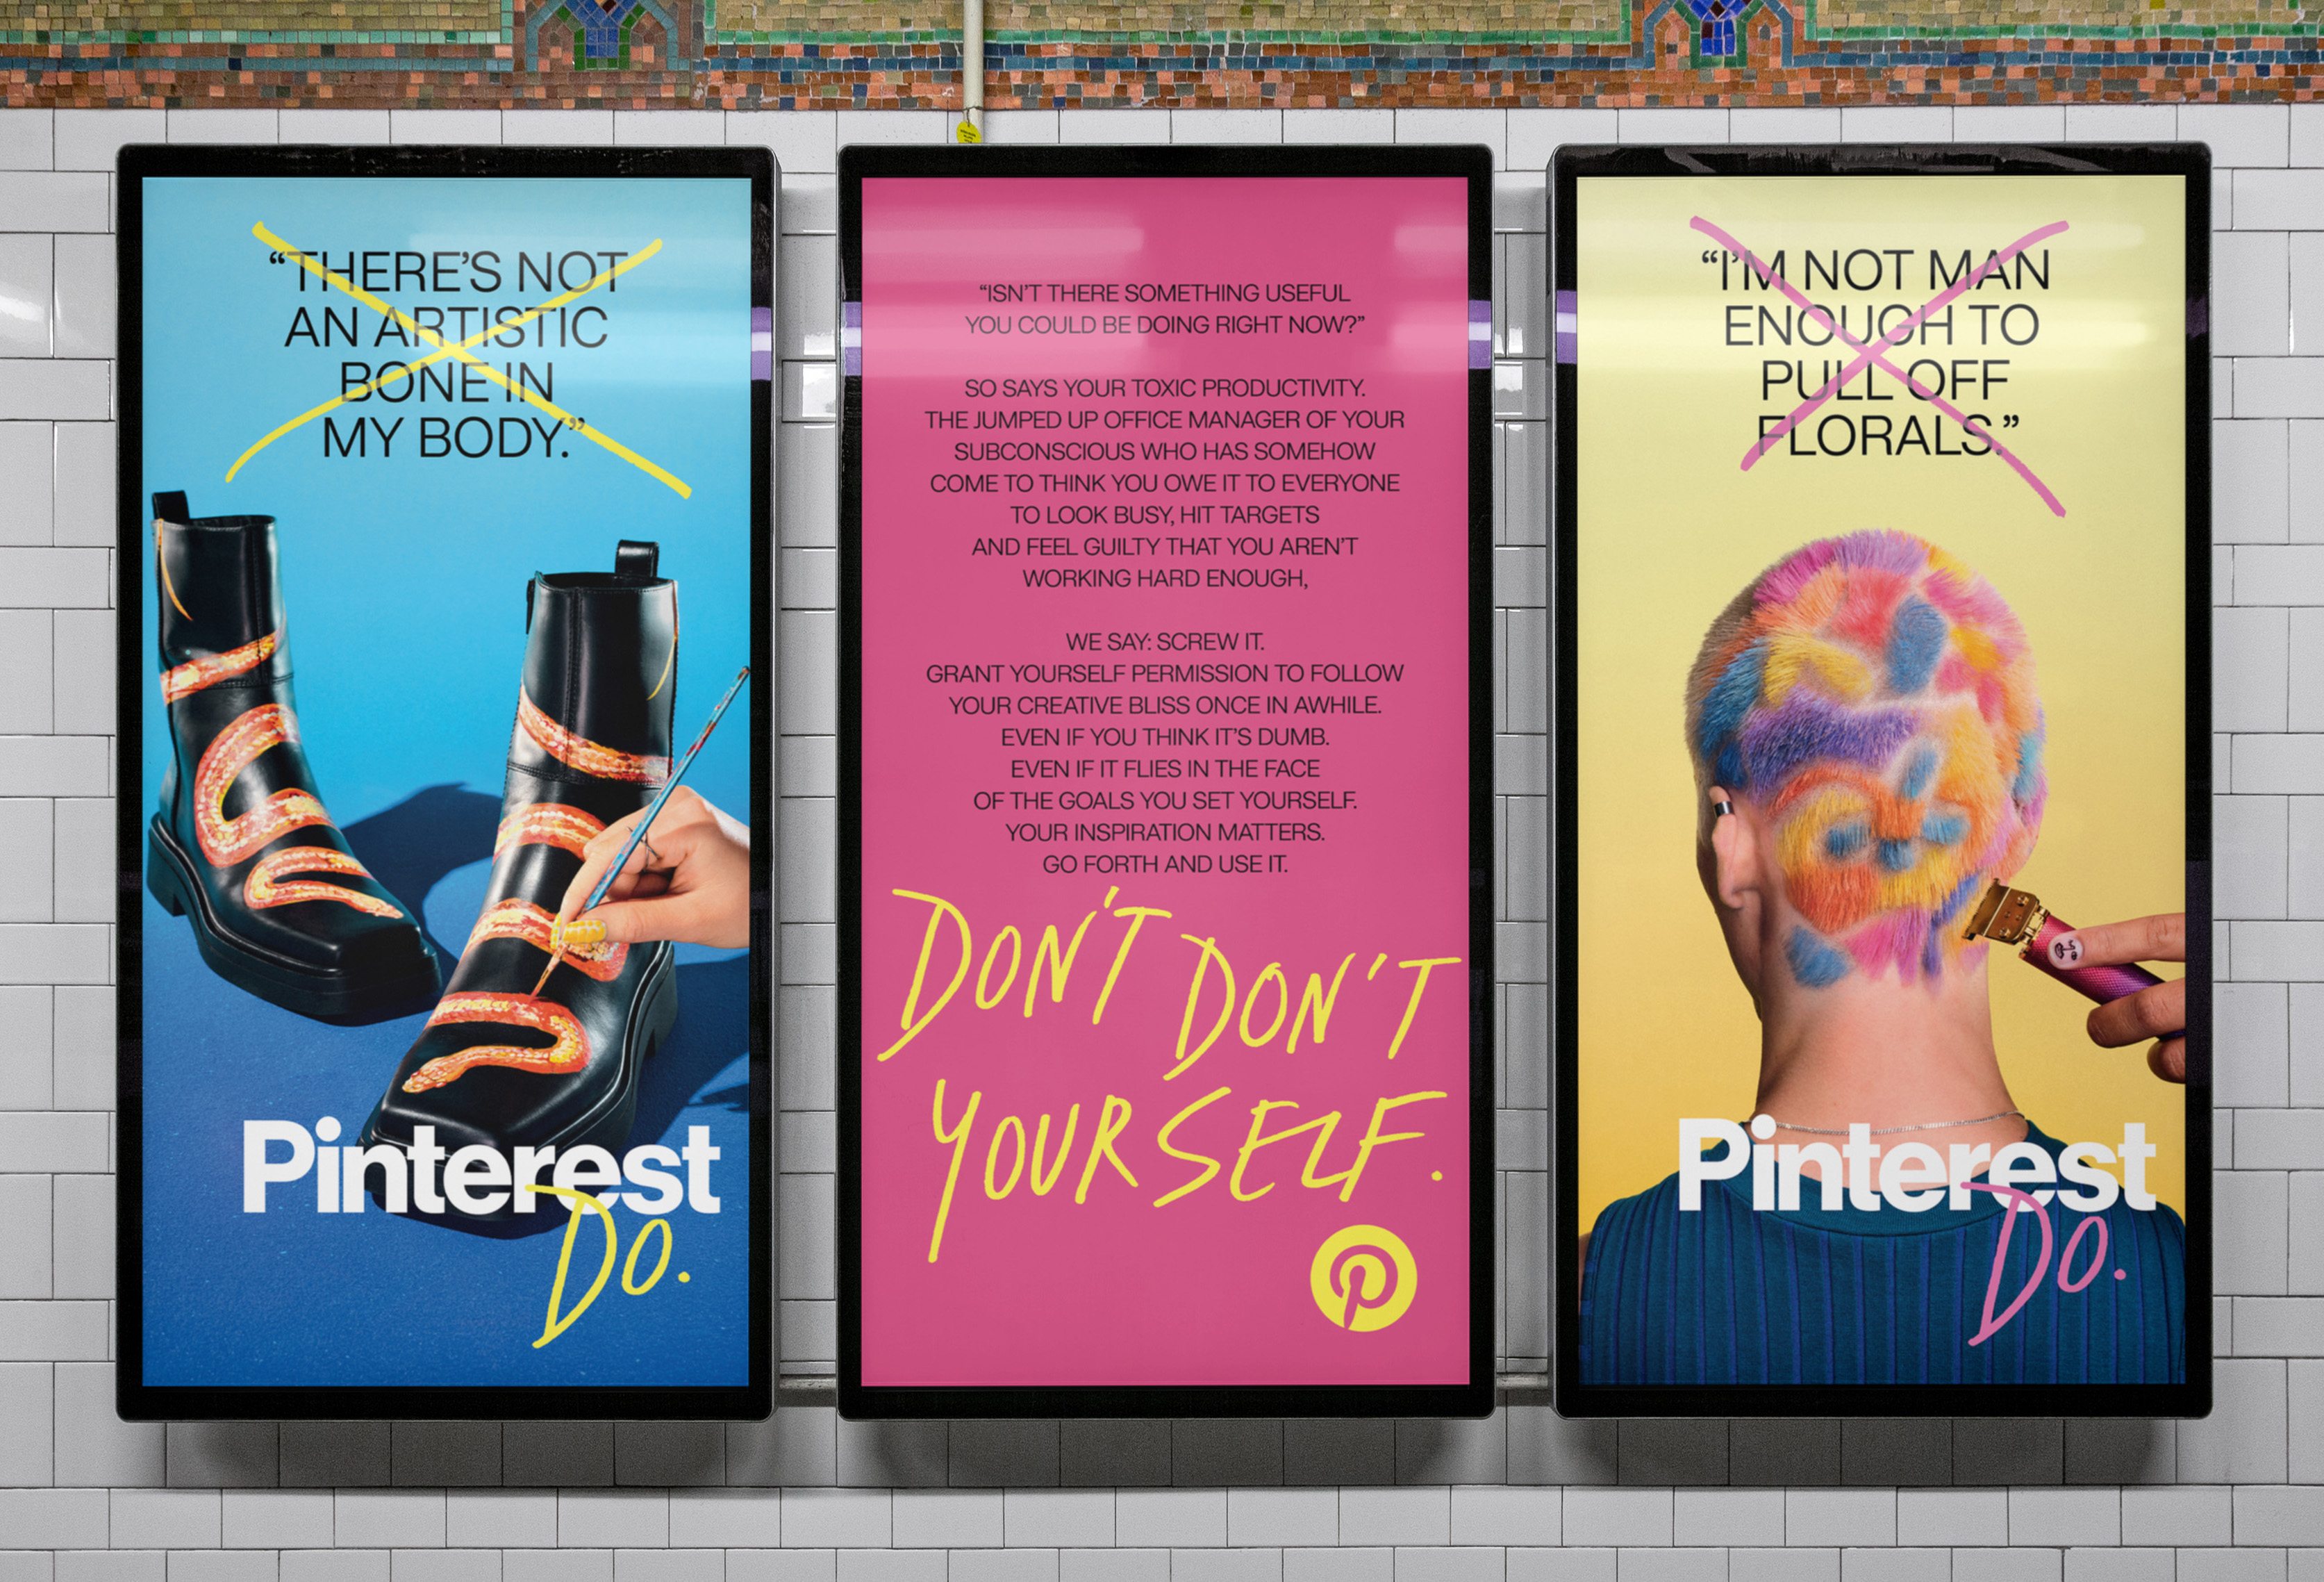 A sample Pinterest campaign of the platform with their brand ad